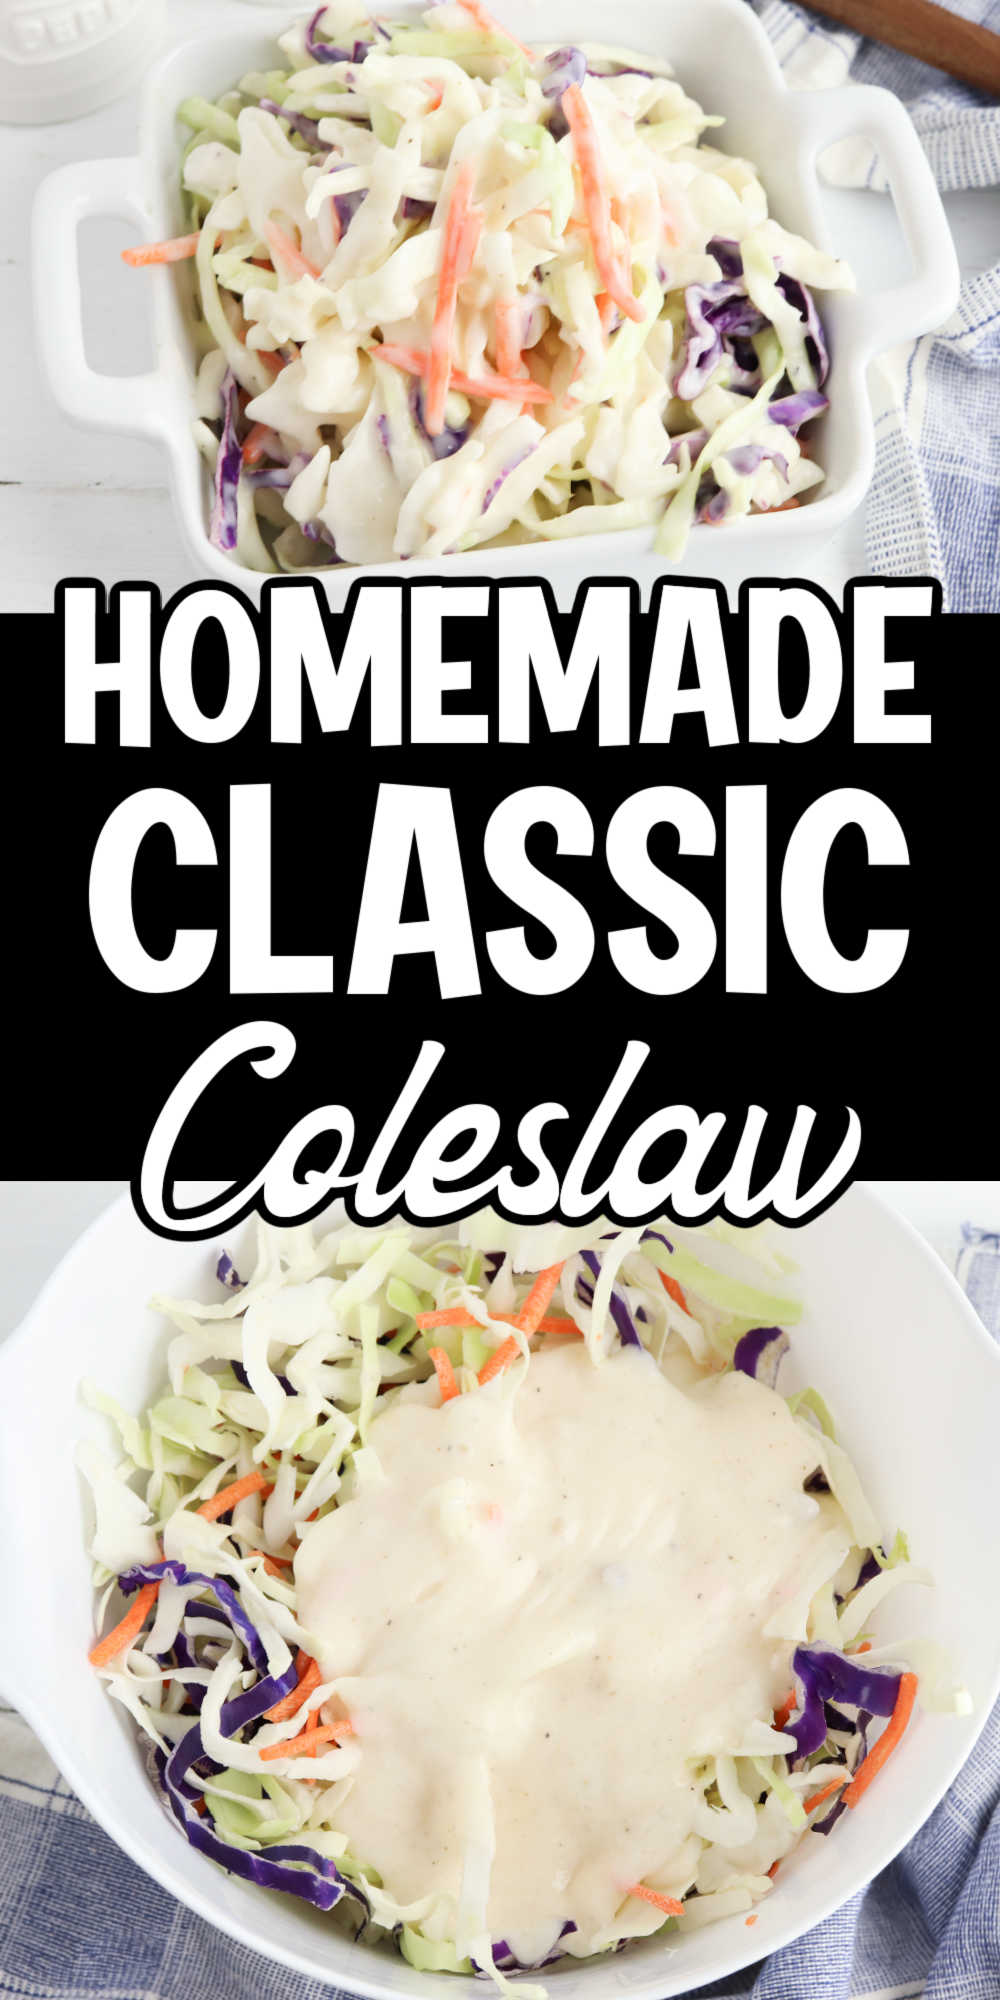 Pin image: top is a container with coleslaw in it, middle says "Homemade Classic Coleslaw" and bottom has a bowl with coleslaw mix and coleslaw dressing in it.